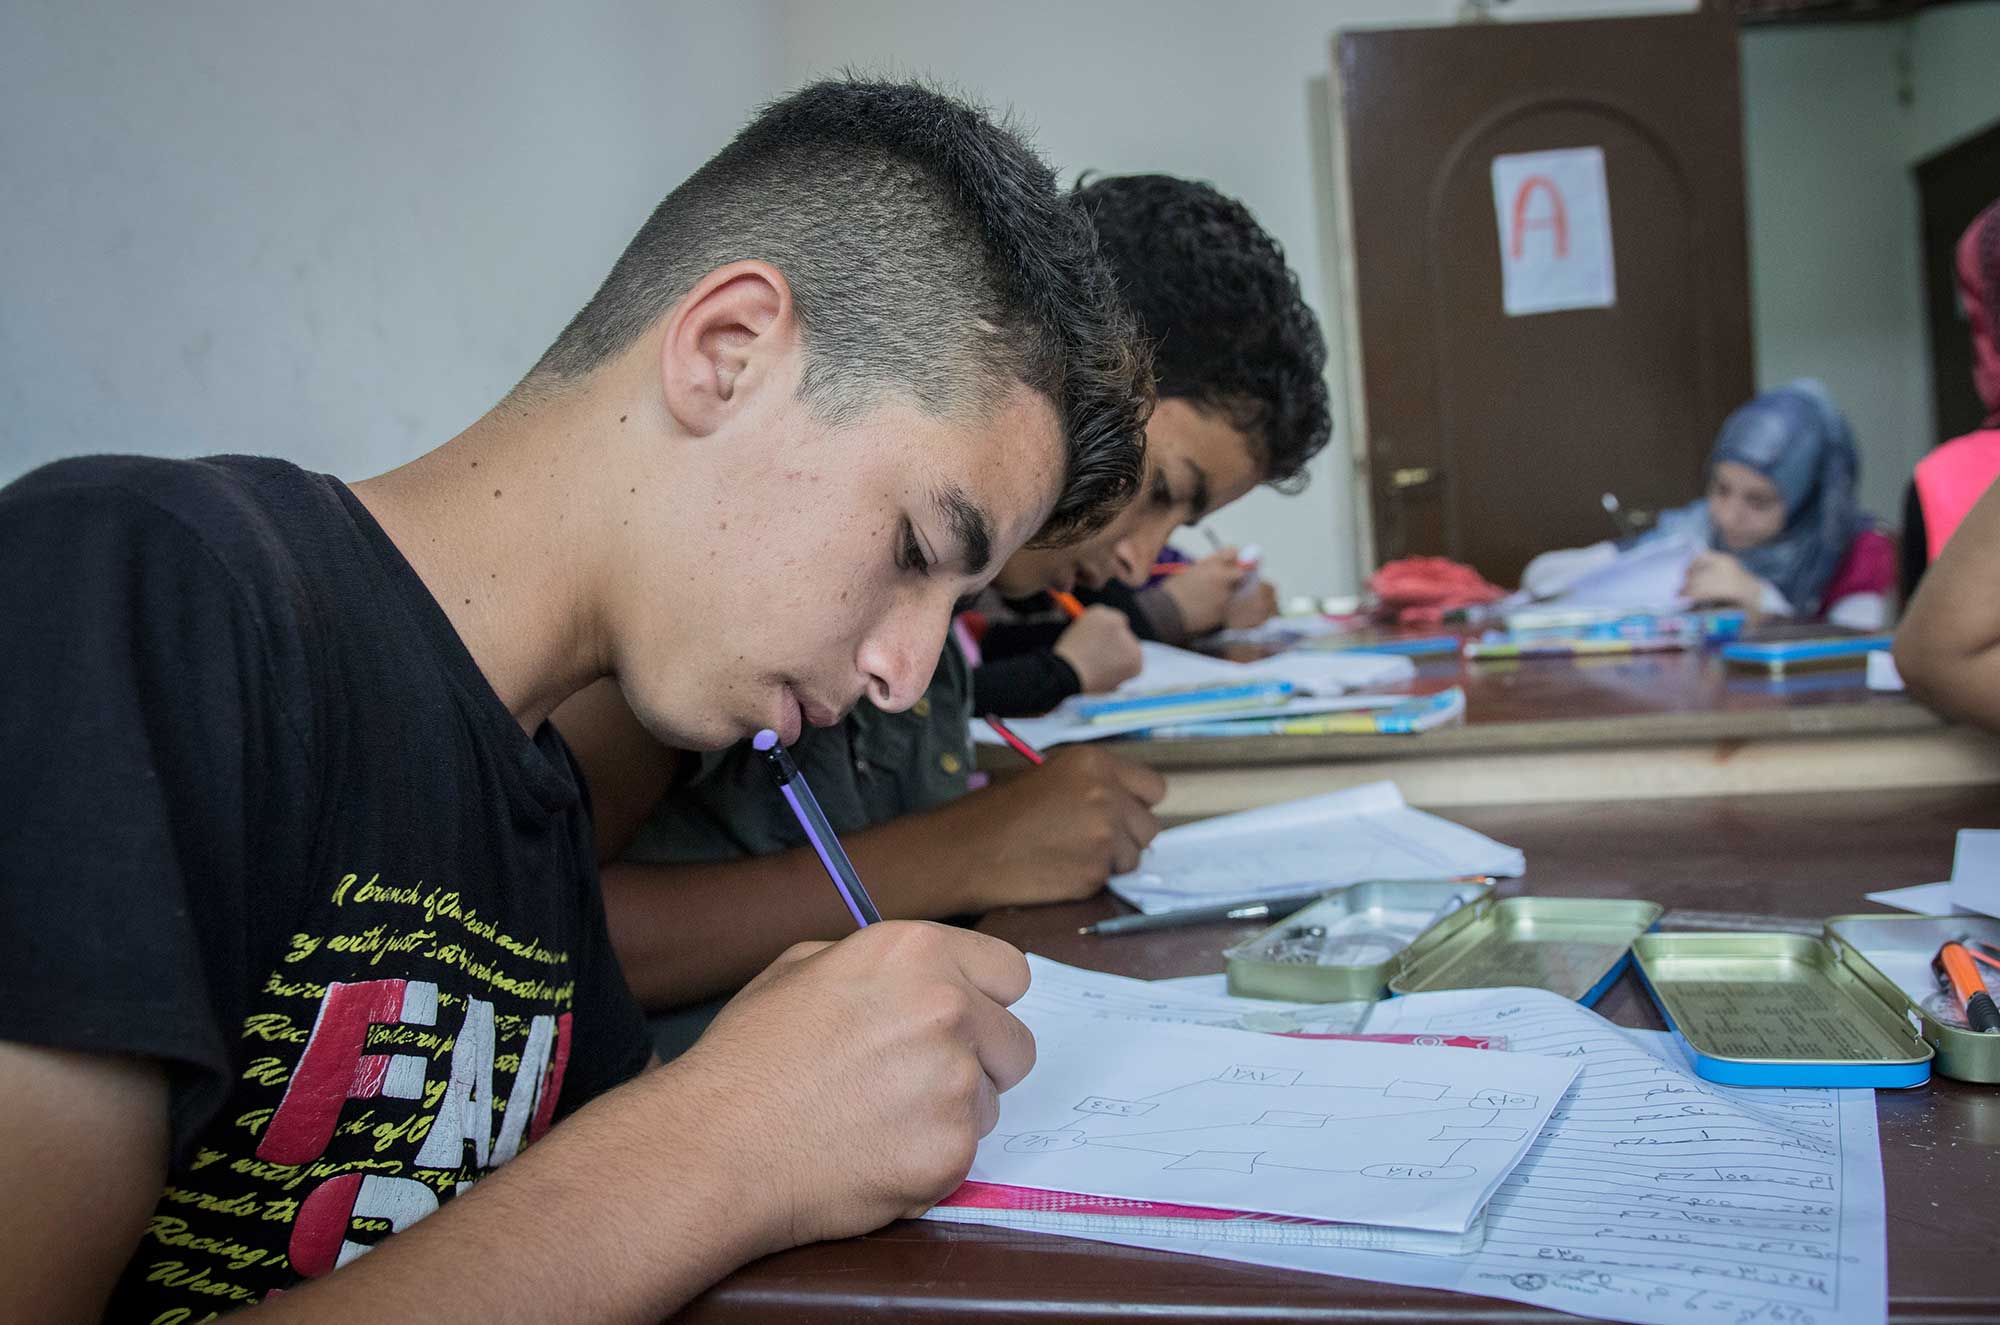 Hassan is a 15-year-old Syrian teen who has been in Bhannine for four years. He is not in formal schooling, and gets his education solely from these courses held by Anera. "I come here to learn what I missed in school," he says.